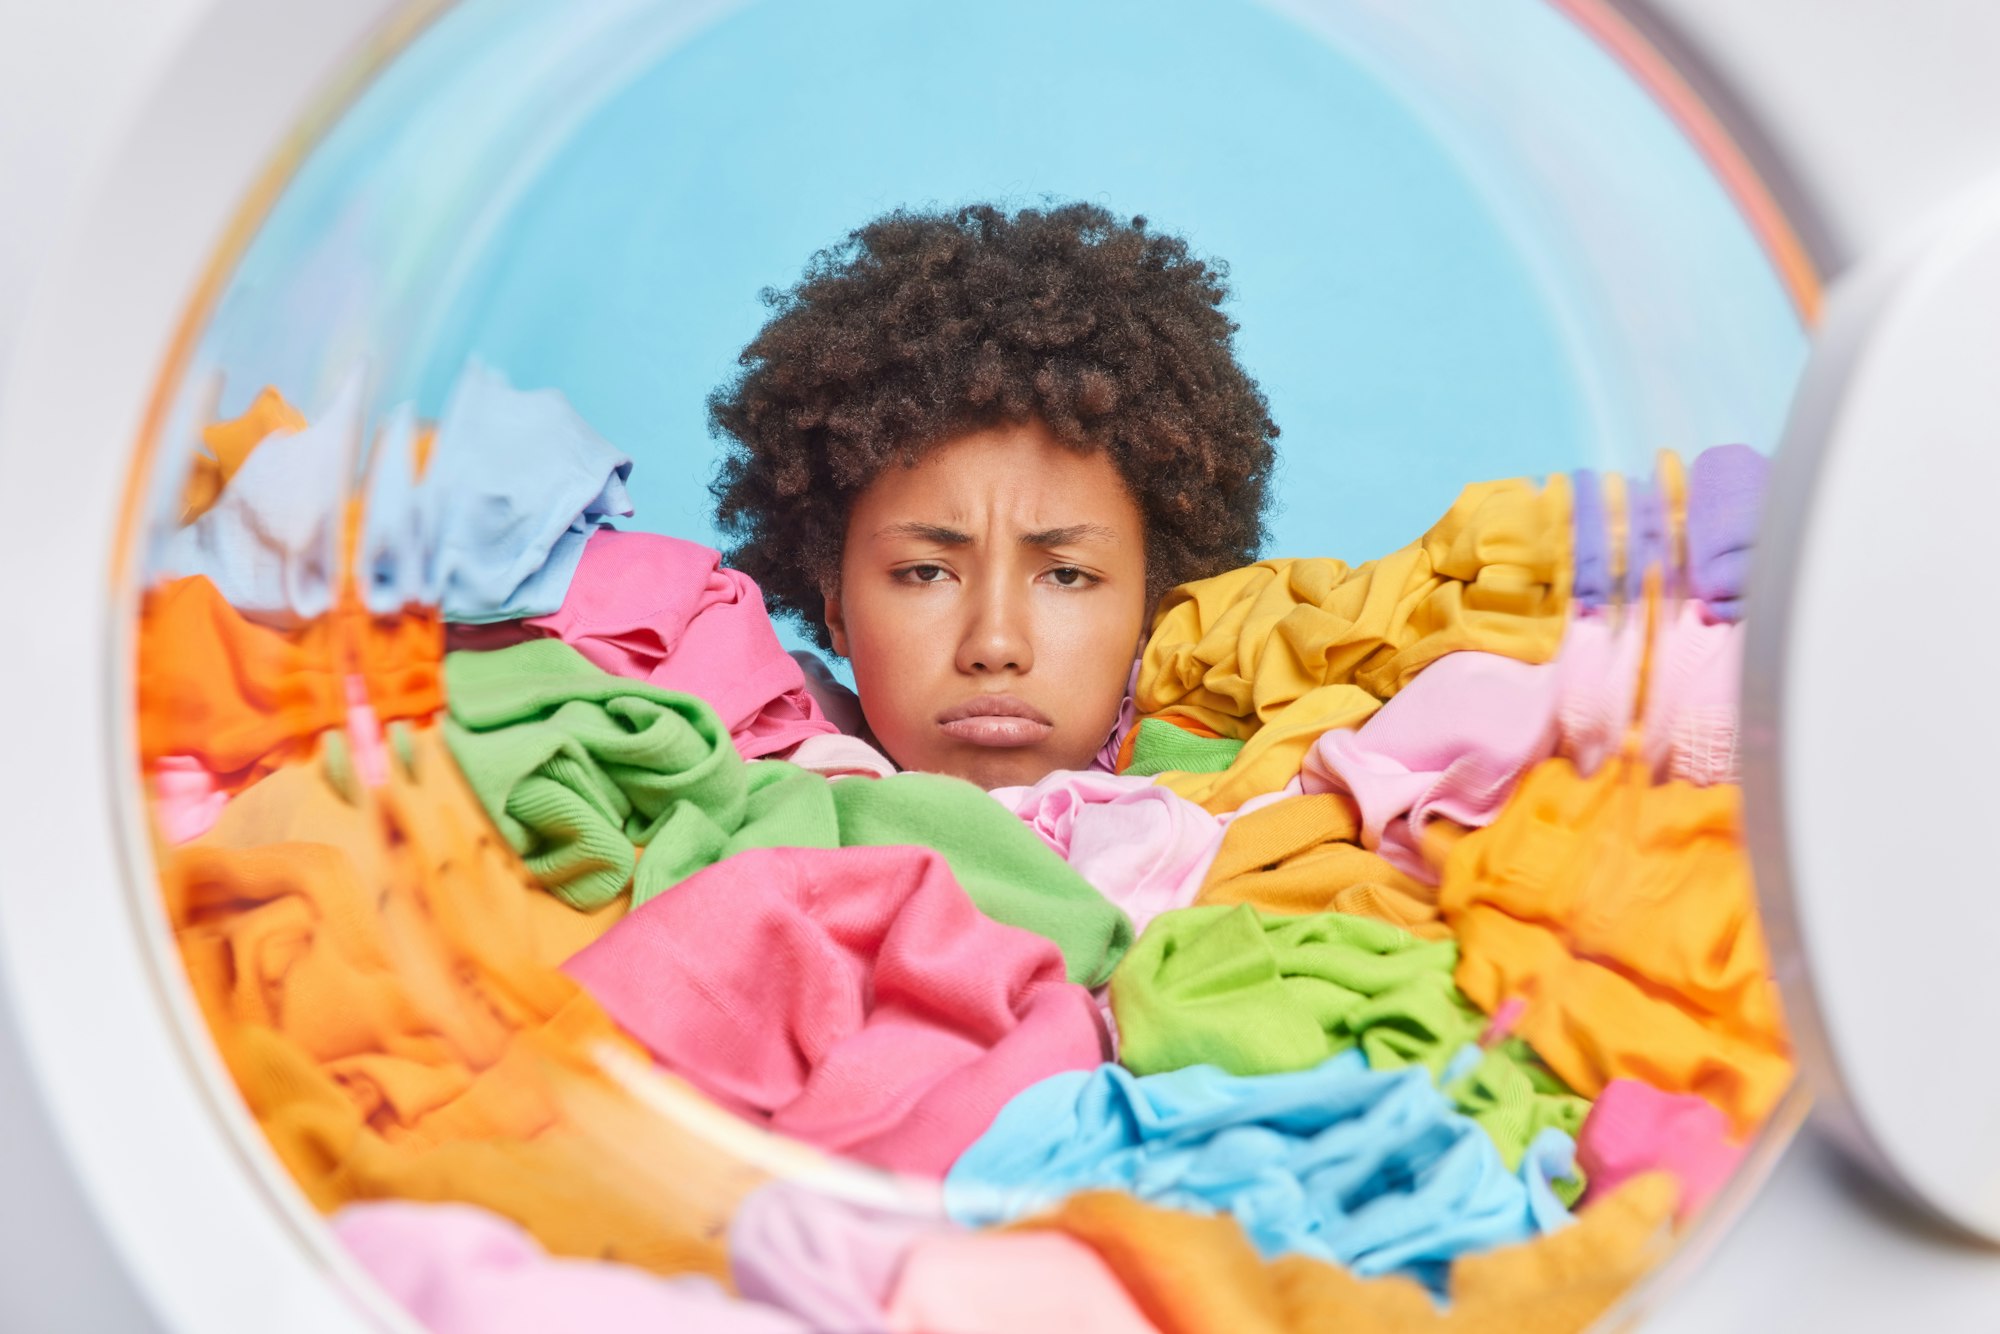 Unhappy African American woman with curly hair has tired expression does laundry at home drowned in